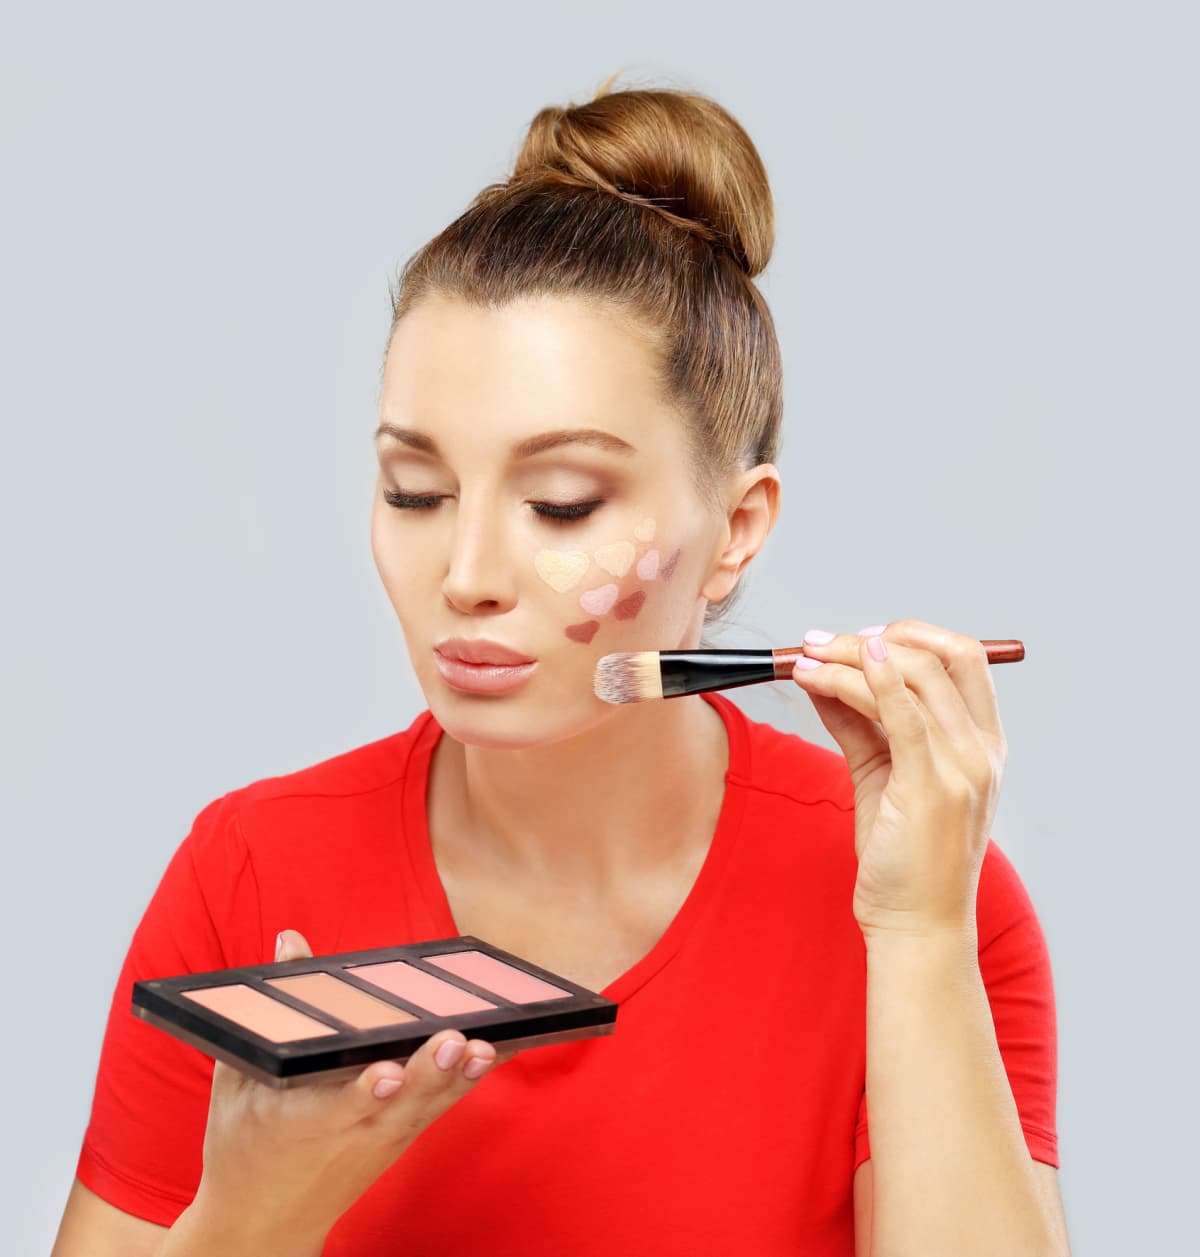 Woman with her eyes closed using contouring and highlighting makeup techniques